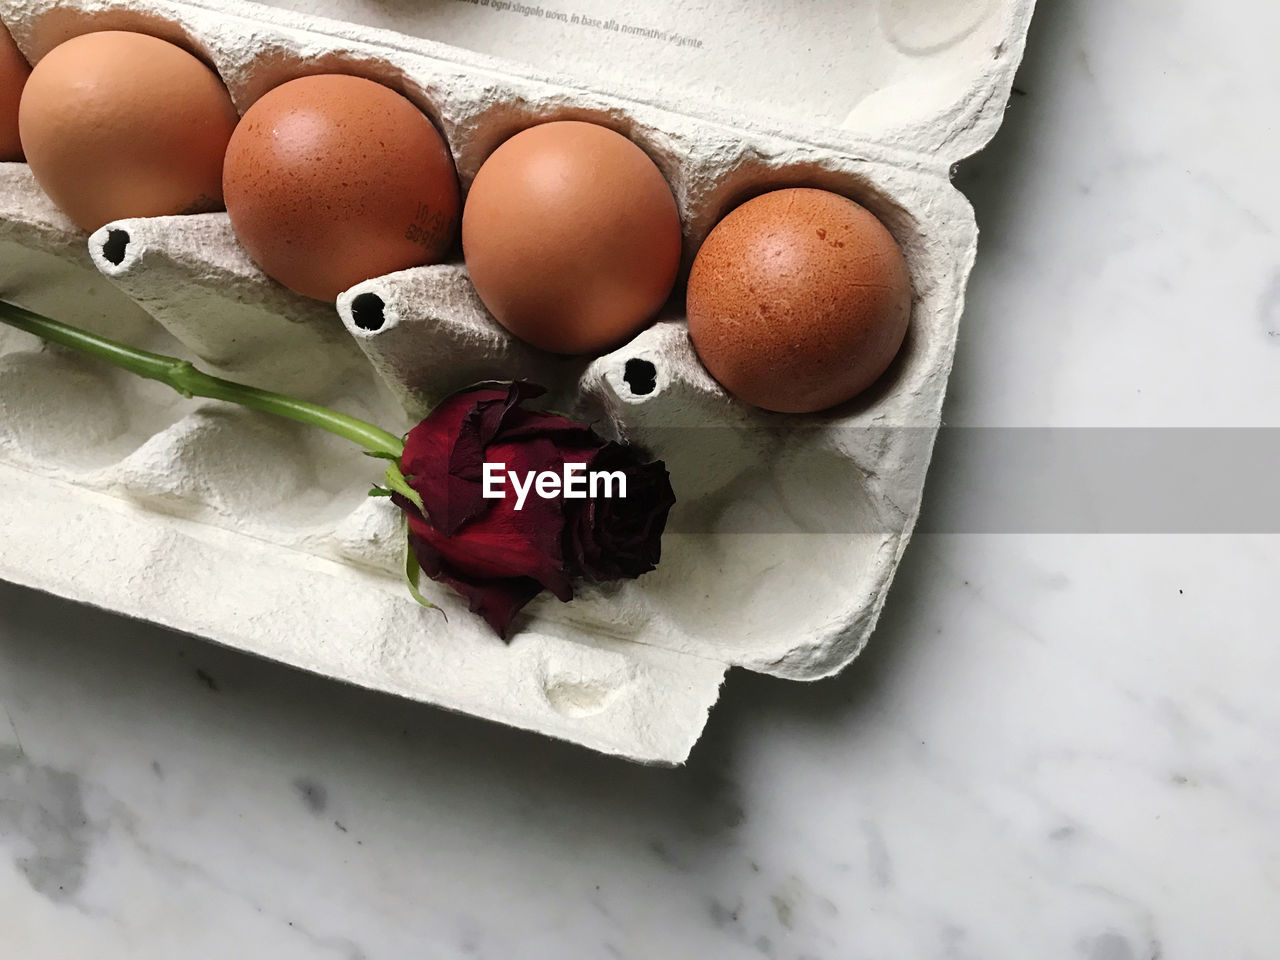 egg, food, food and drink, freshness, healthy eating, egg carton, wellbeing, animal egg, no people, still life, raw food, indoors, high angle view, fragility, ingredient, container, organic, easter egg, eggshell, egg yolk, studio shot, group of objects, box, shell, easter, nature